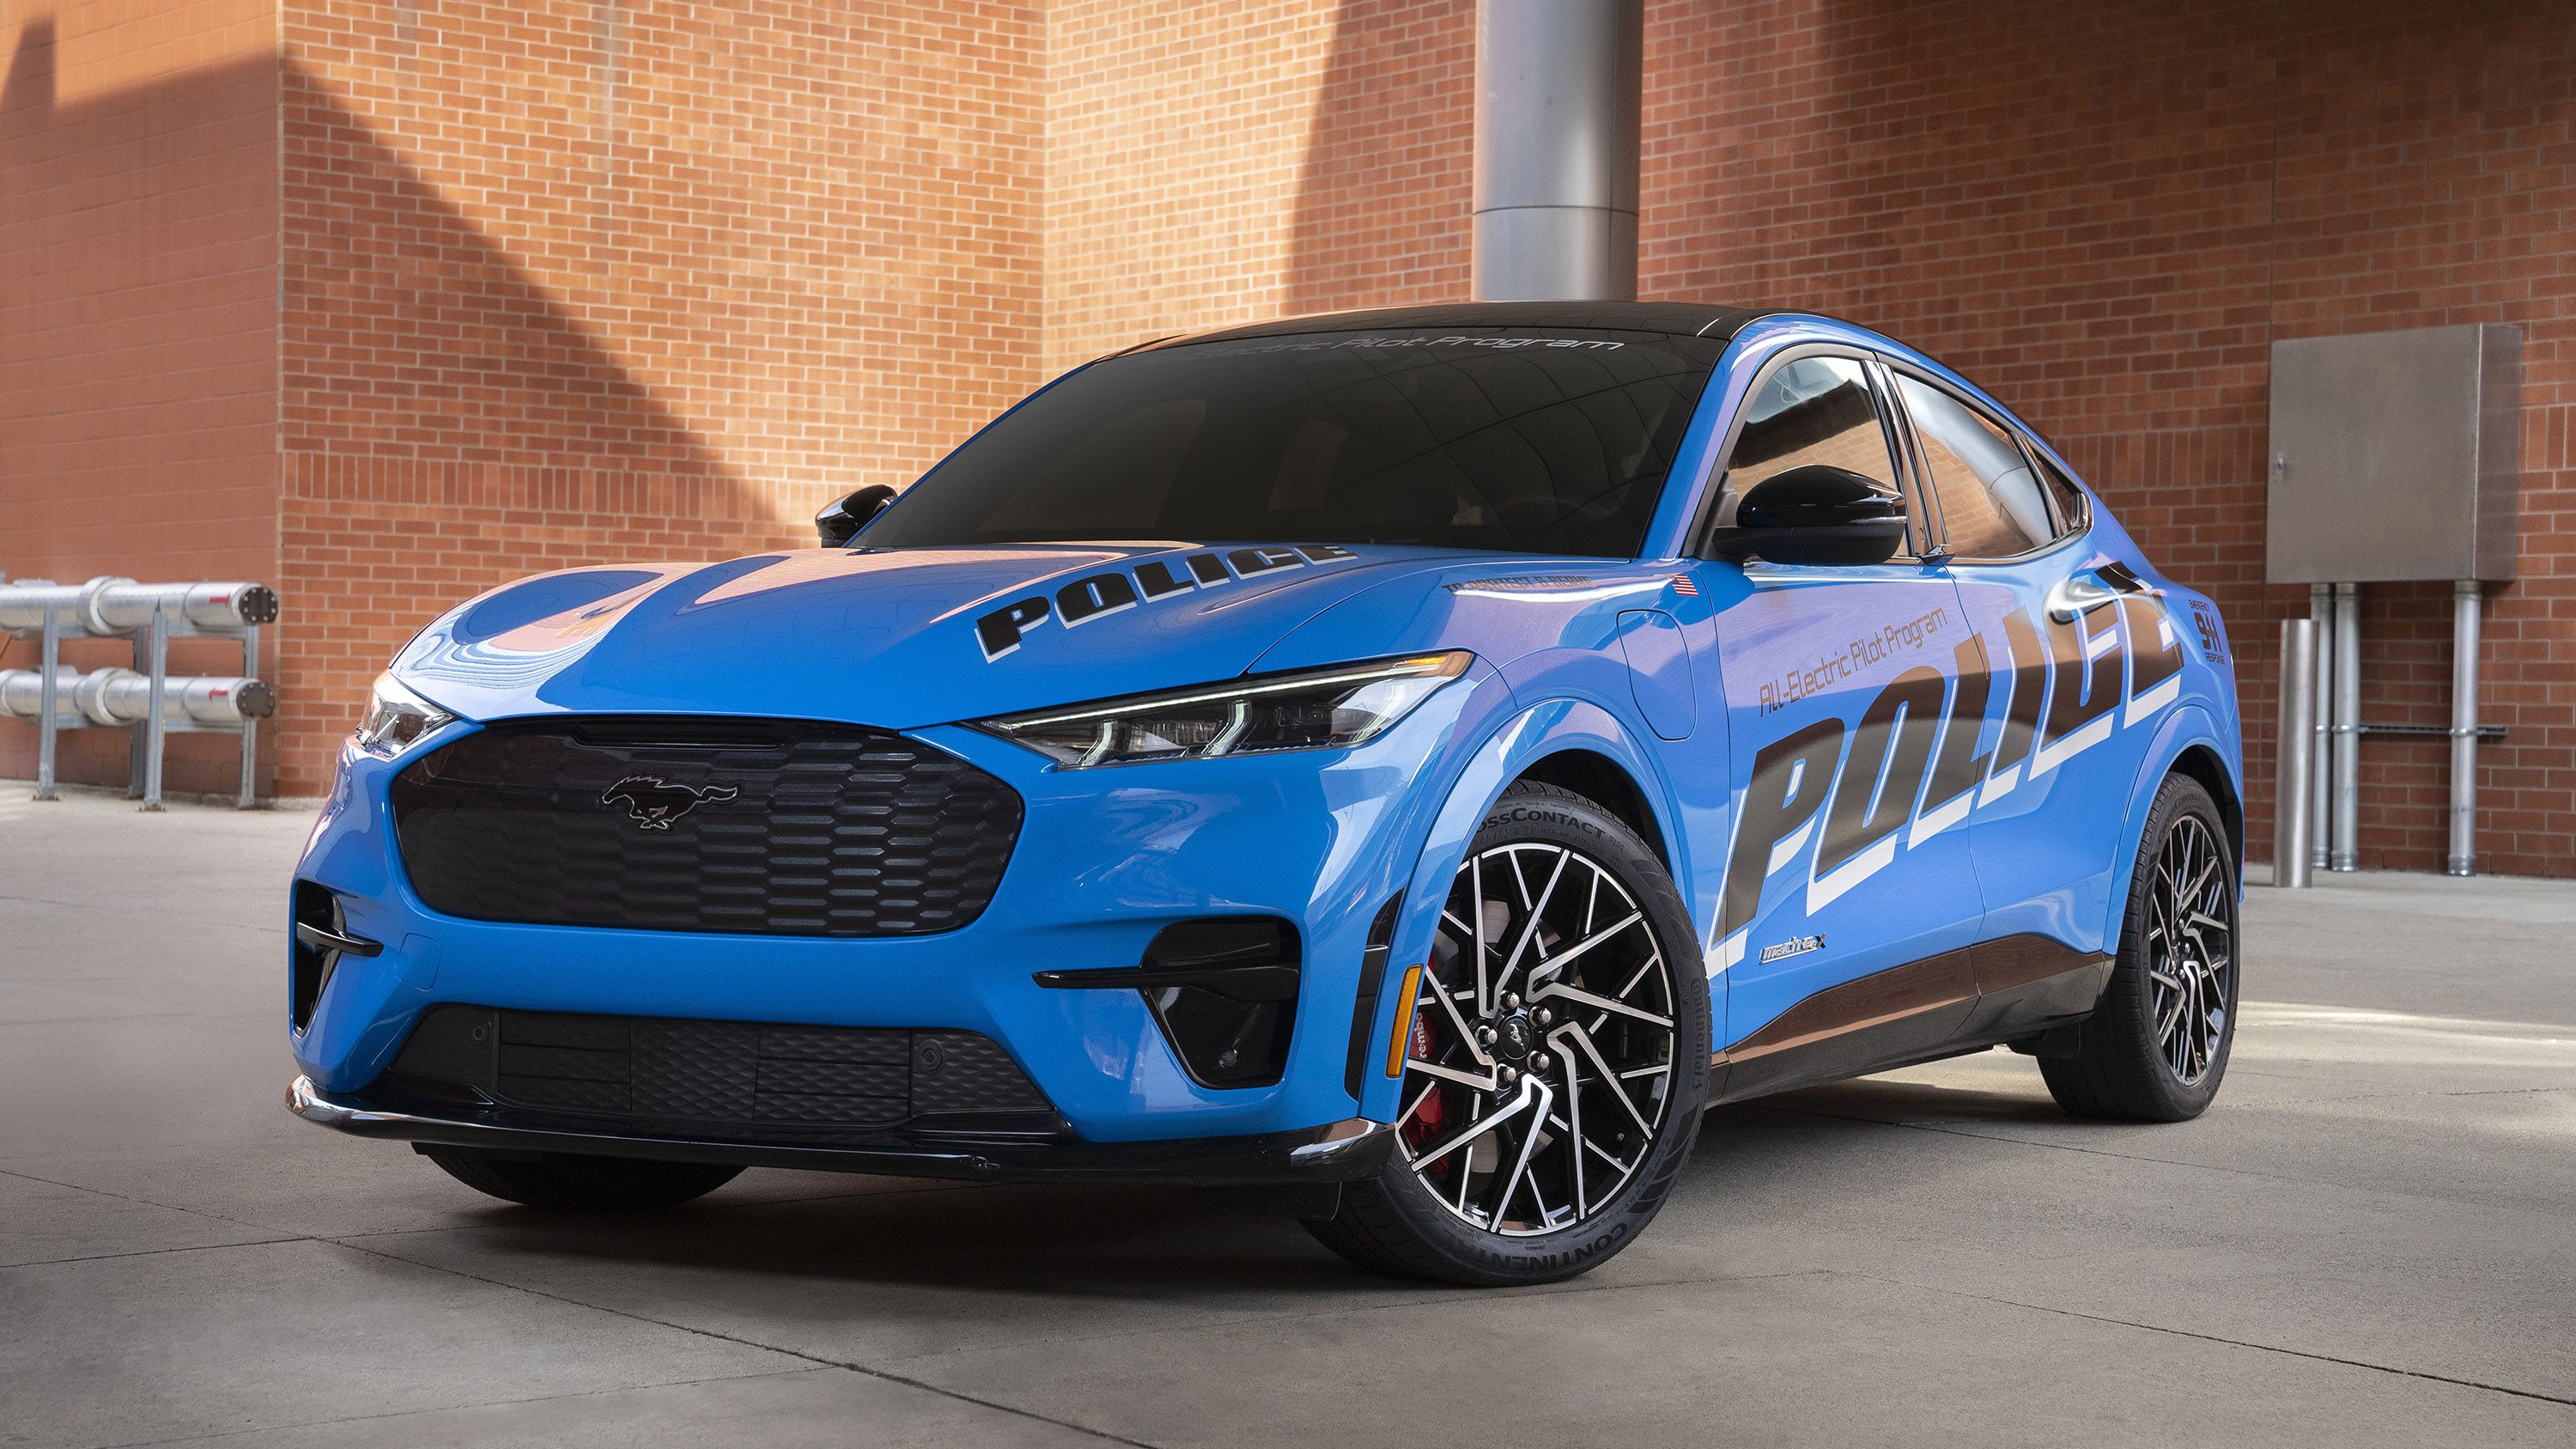 Ford Mustang Mach E To Undergo Police Car Tests